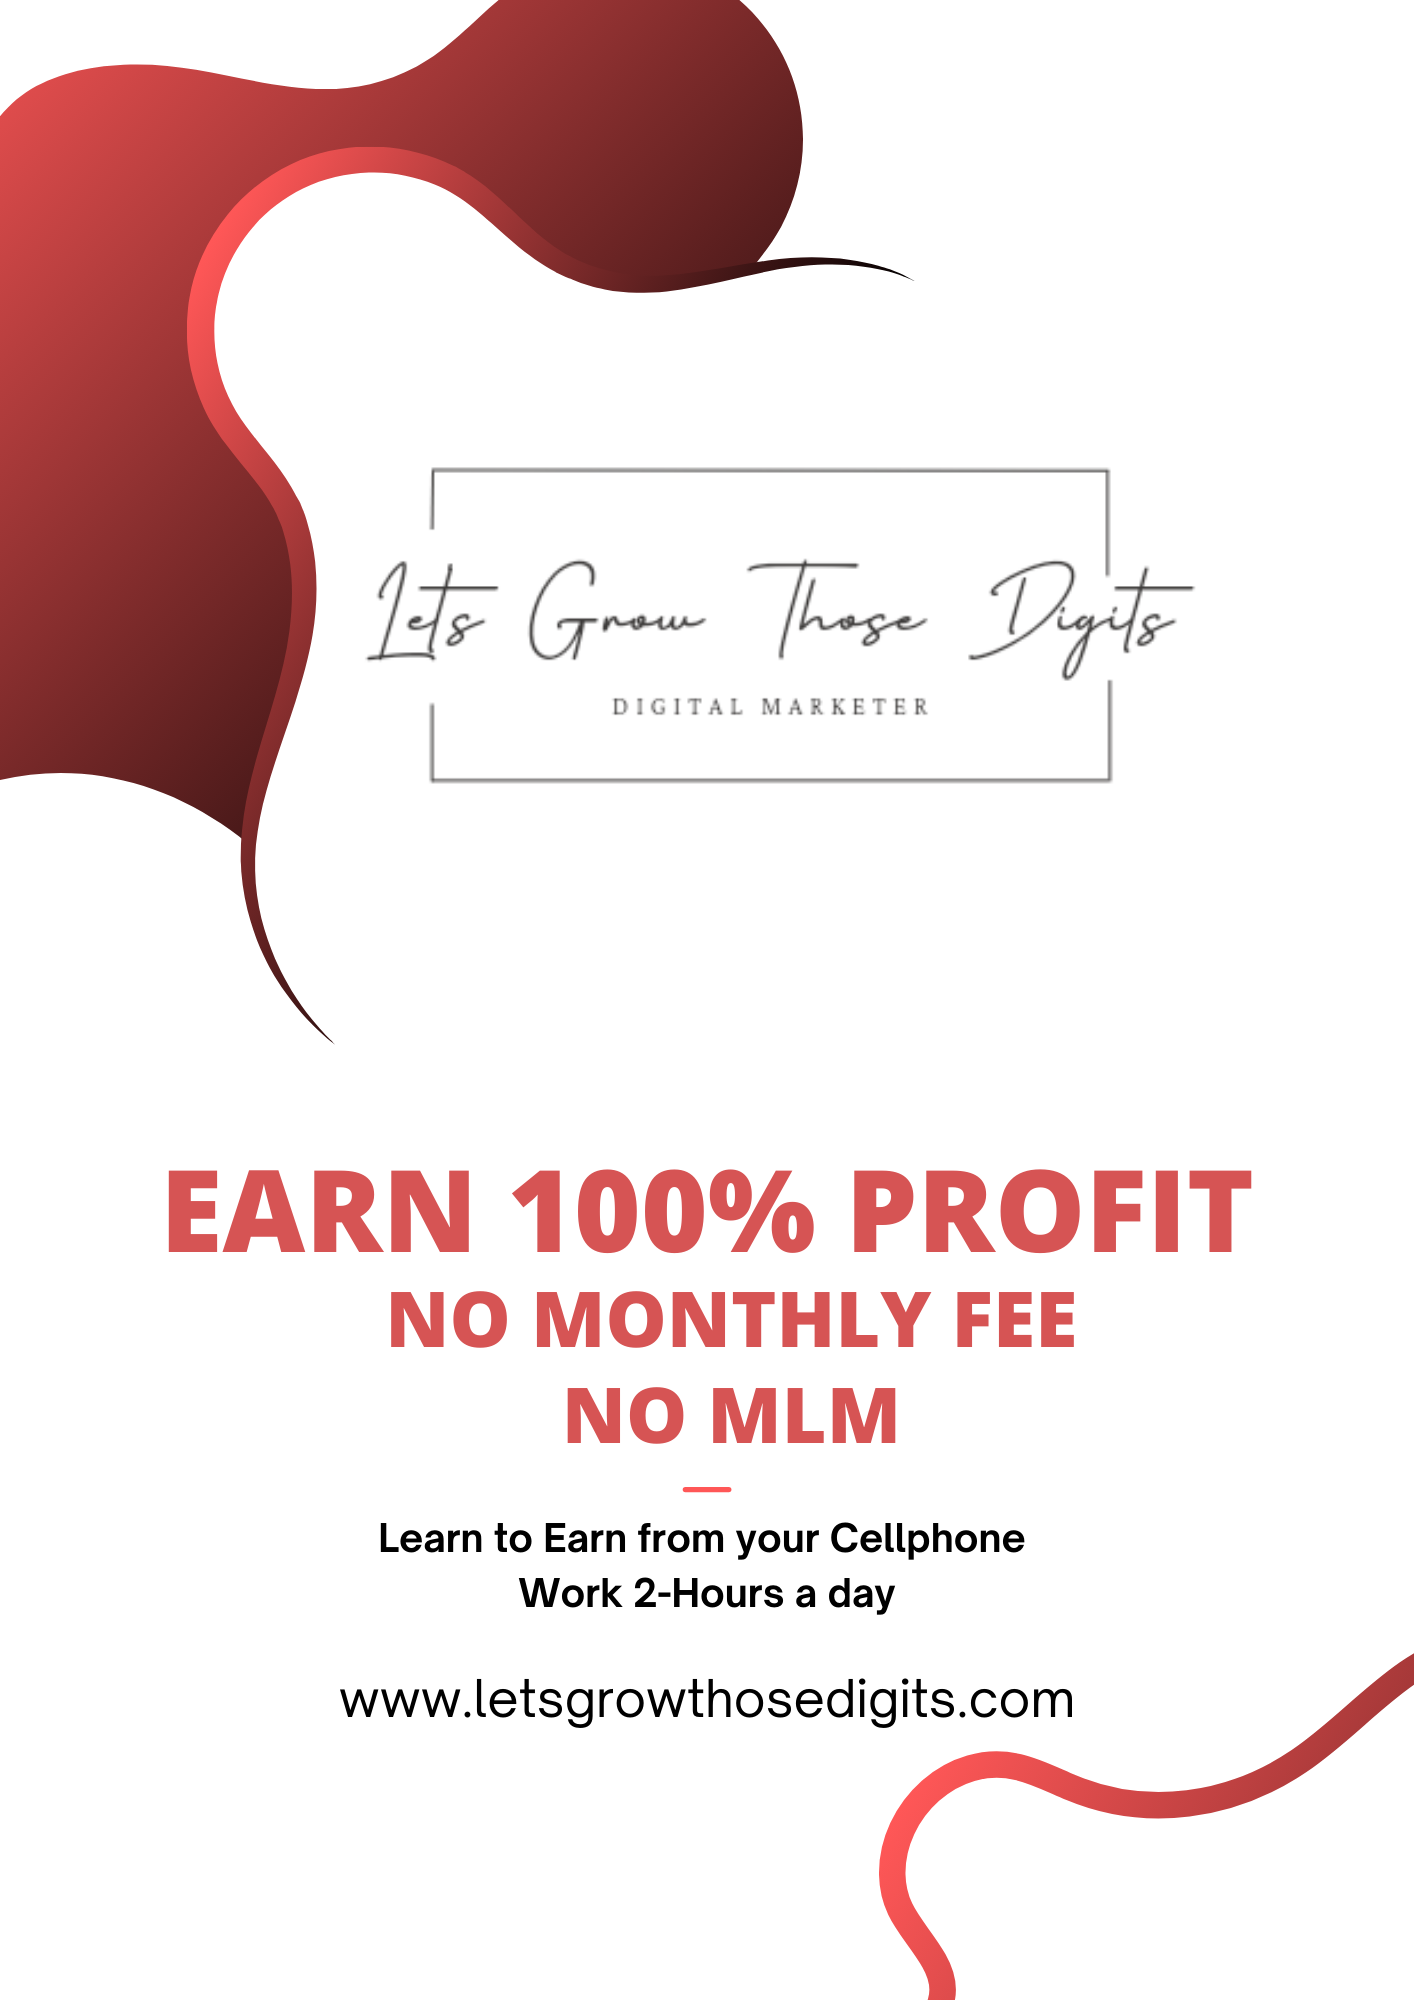 Earn Big-Work Little: $100 Daily in Just 2 Hours! - Dallas Sales, Marketing